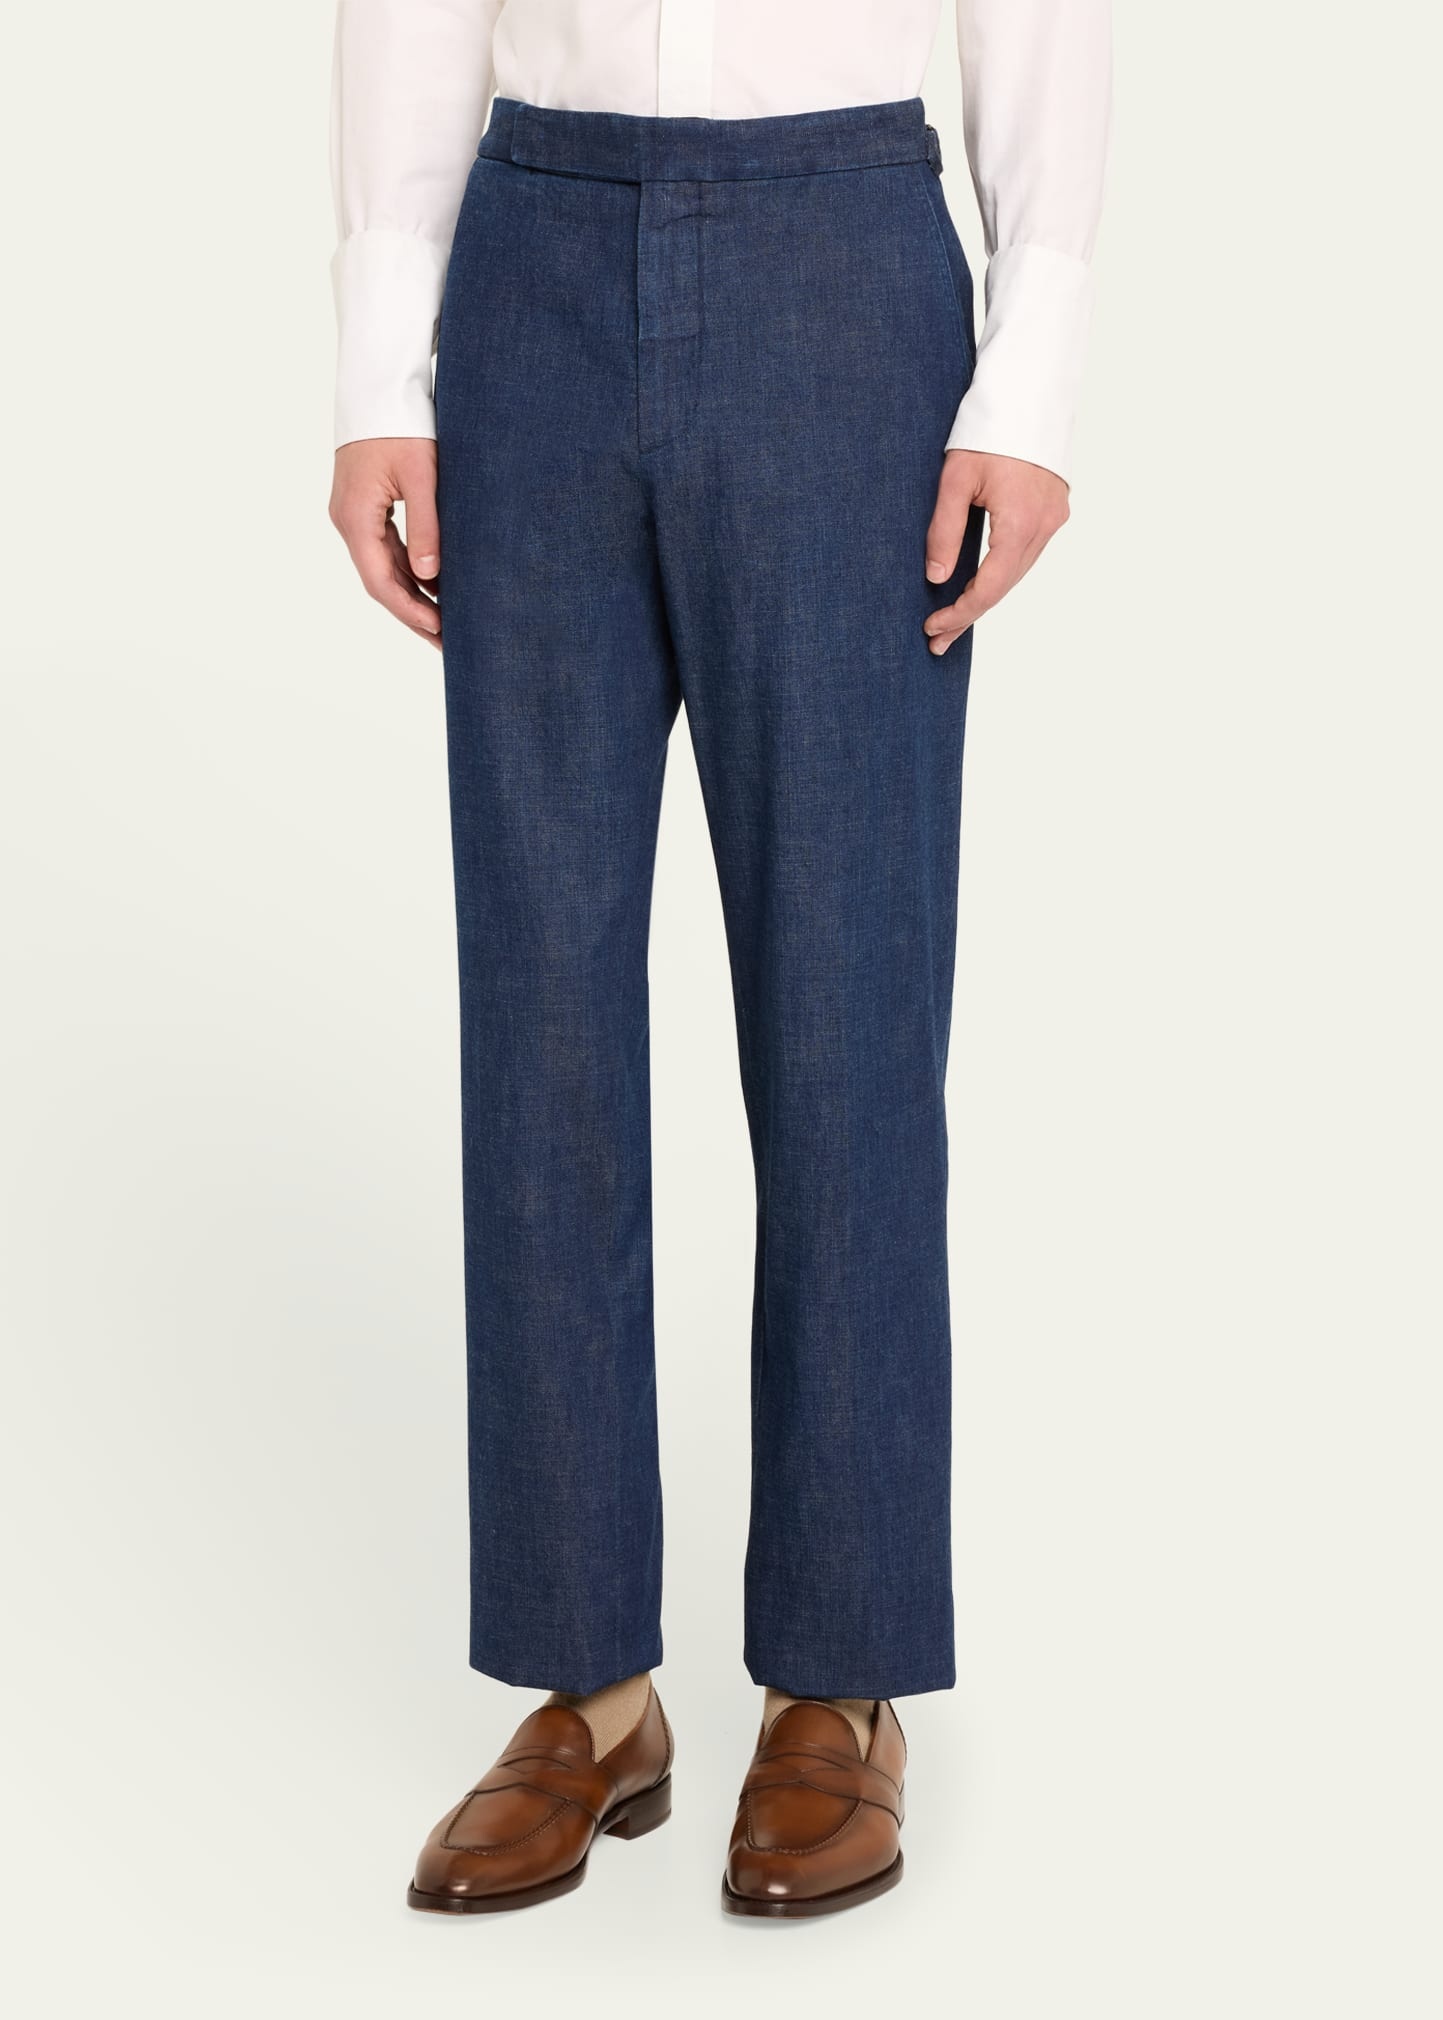 Men's Gregory Hand-Tailored Denim Suit Trousers - 4